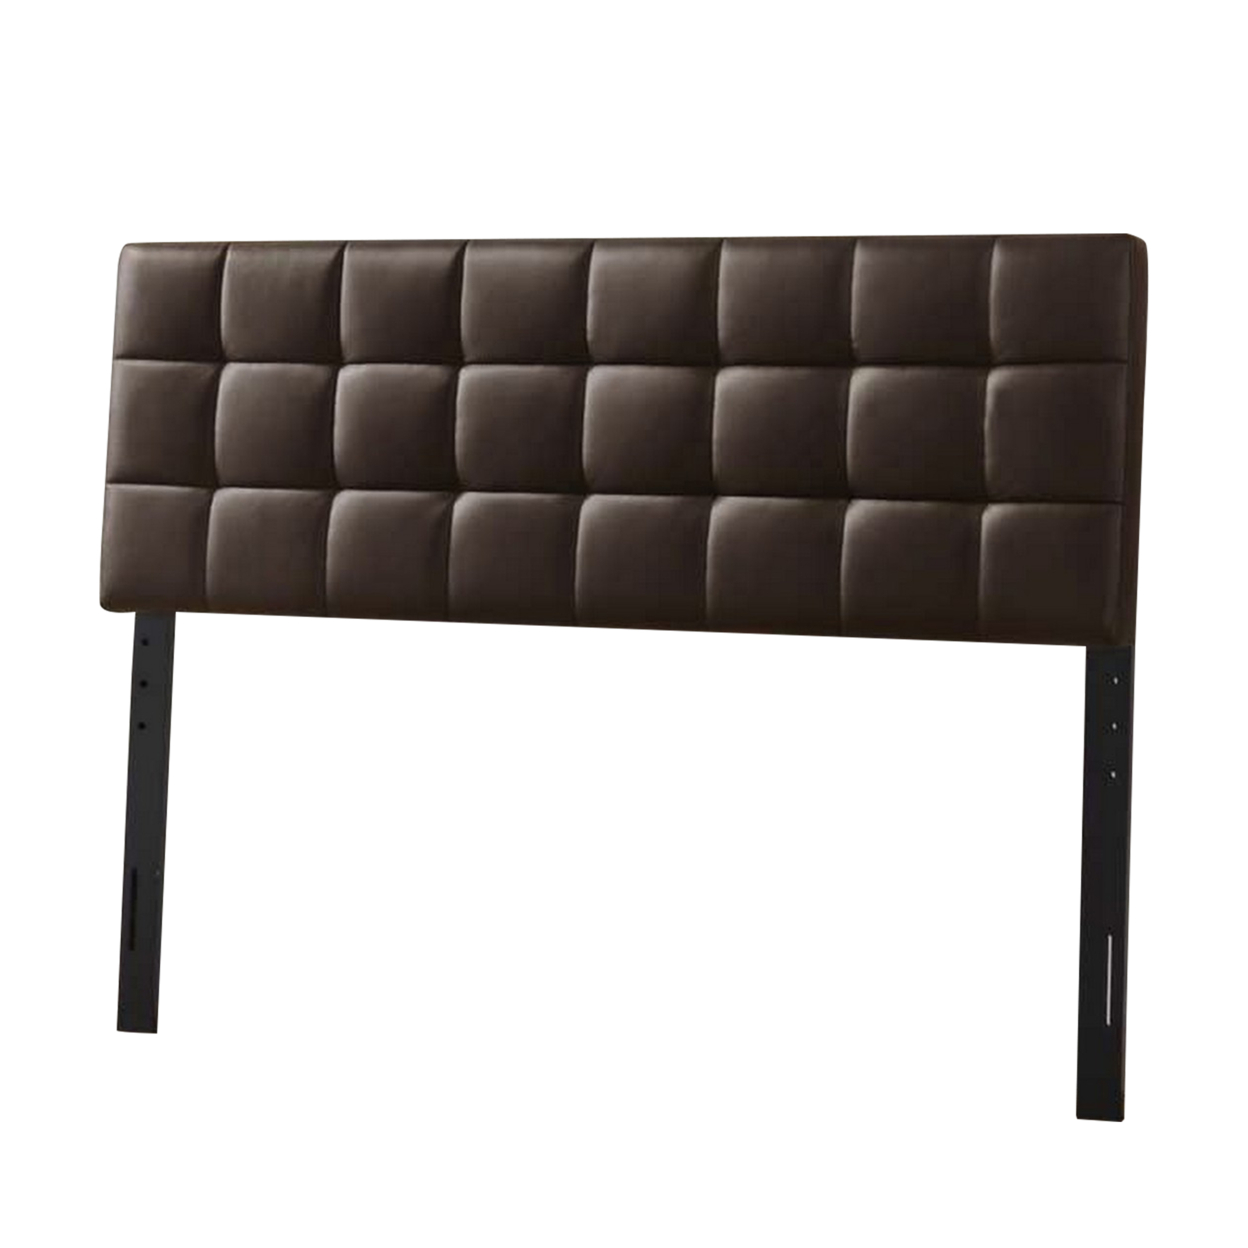 Faux Leather Upholstered Full Size Headboard With Square Tufting, Brown- Saltoro Sherpi